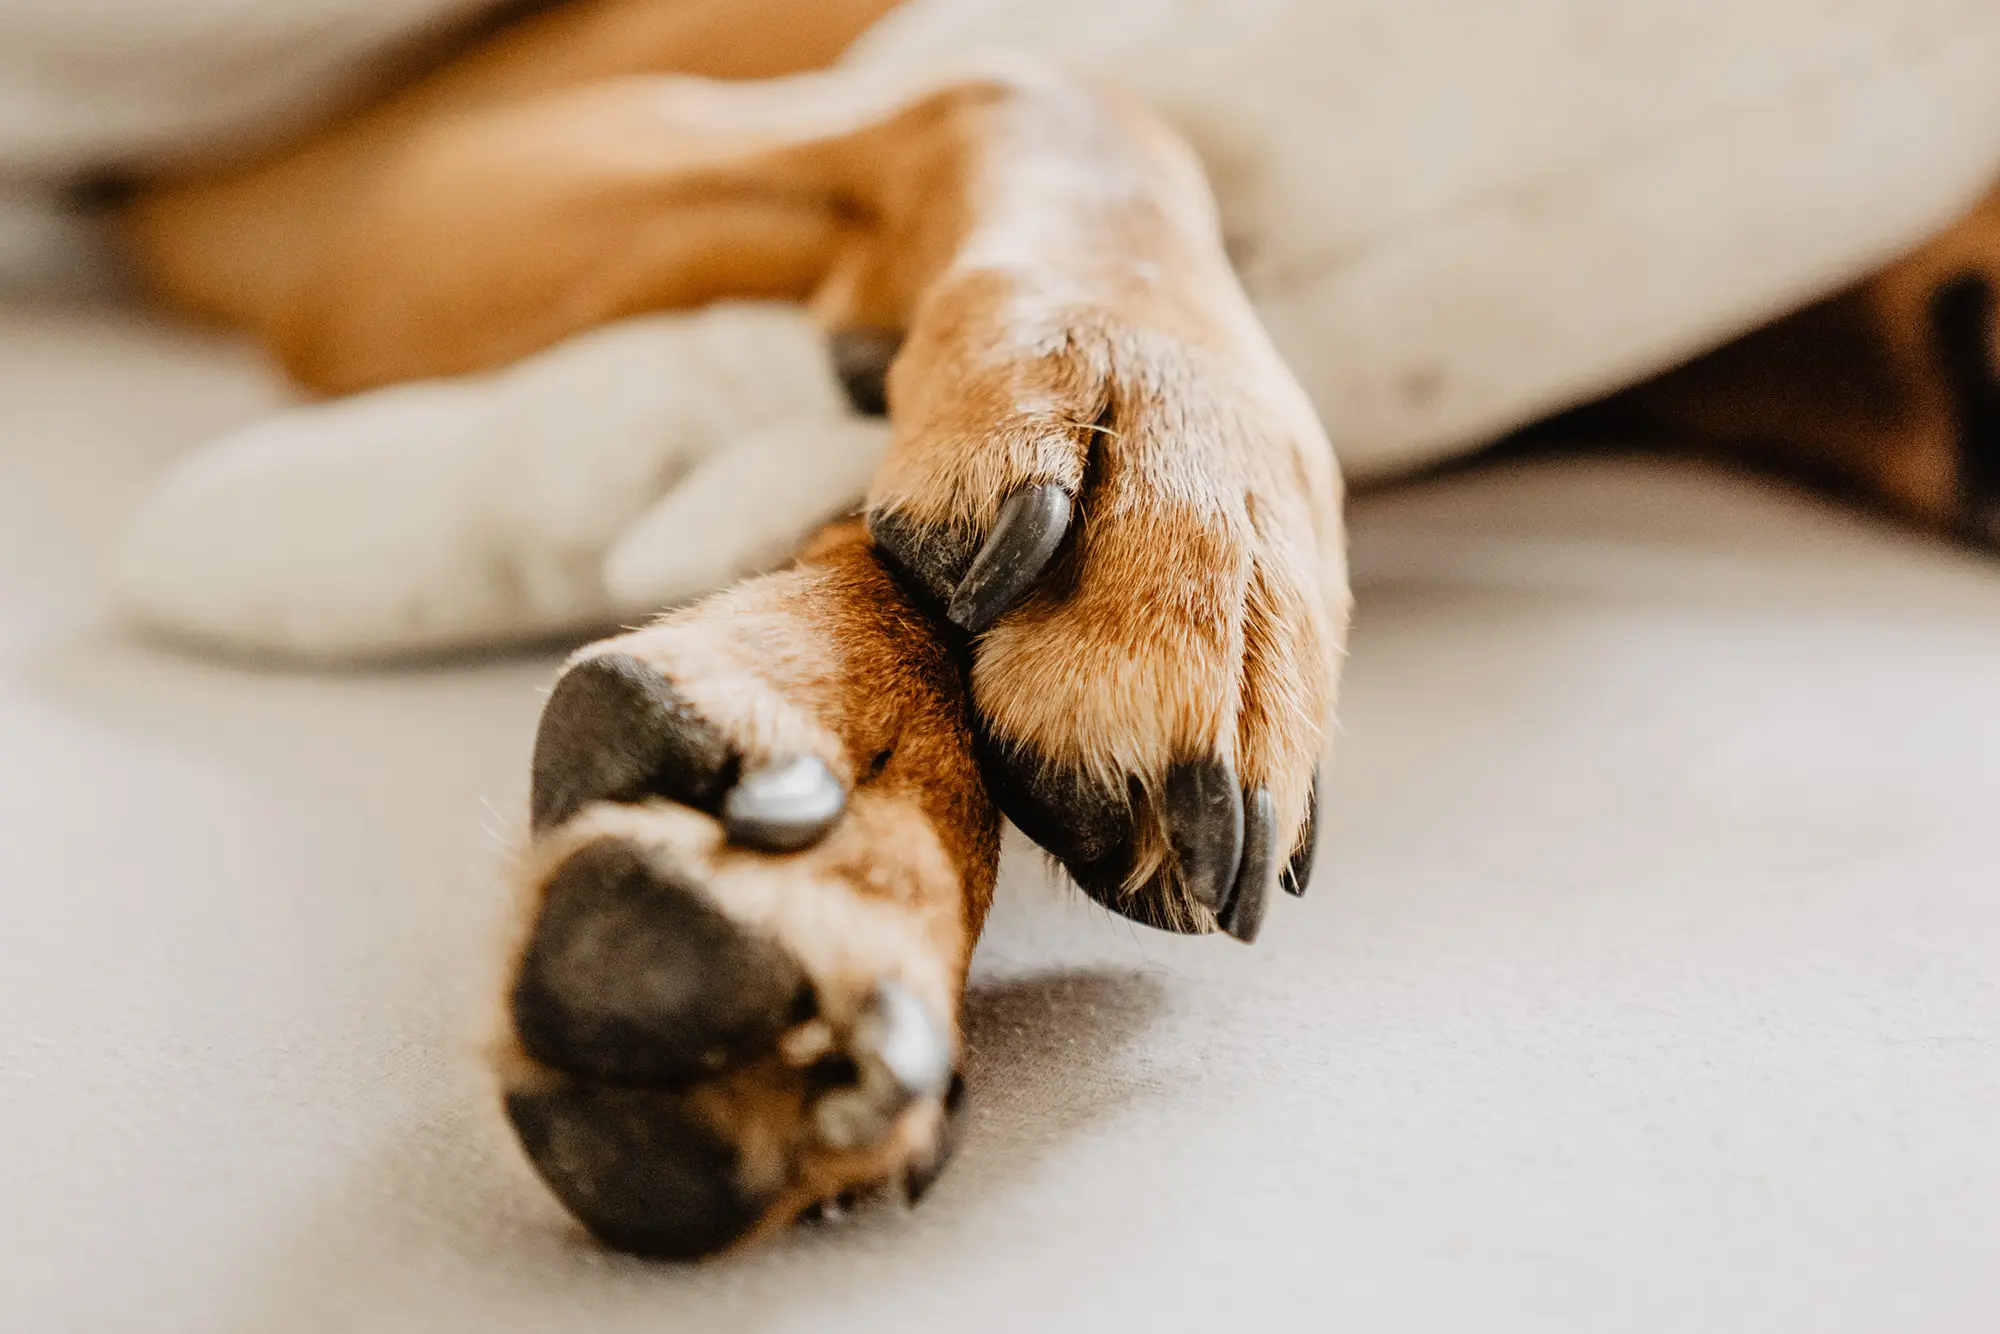 Paw Care 101: How to Take Care of Your Dog's Paws